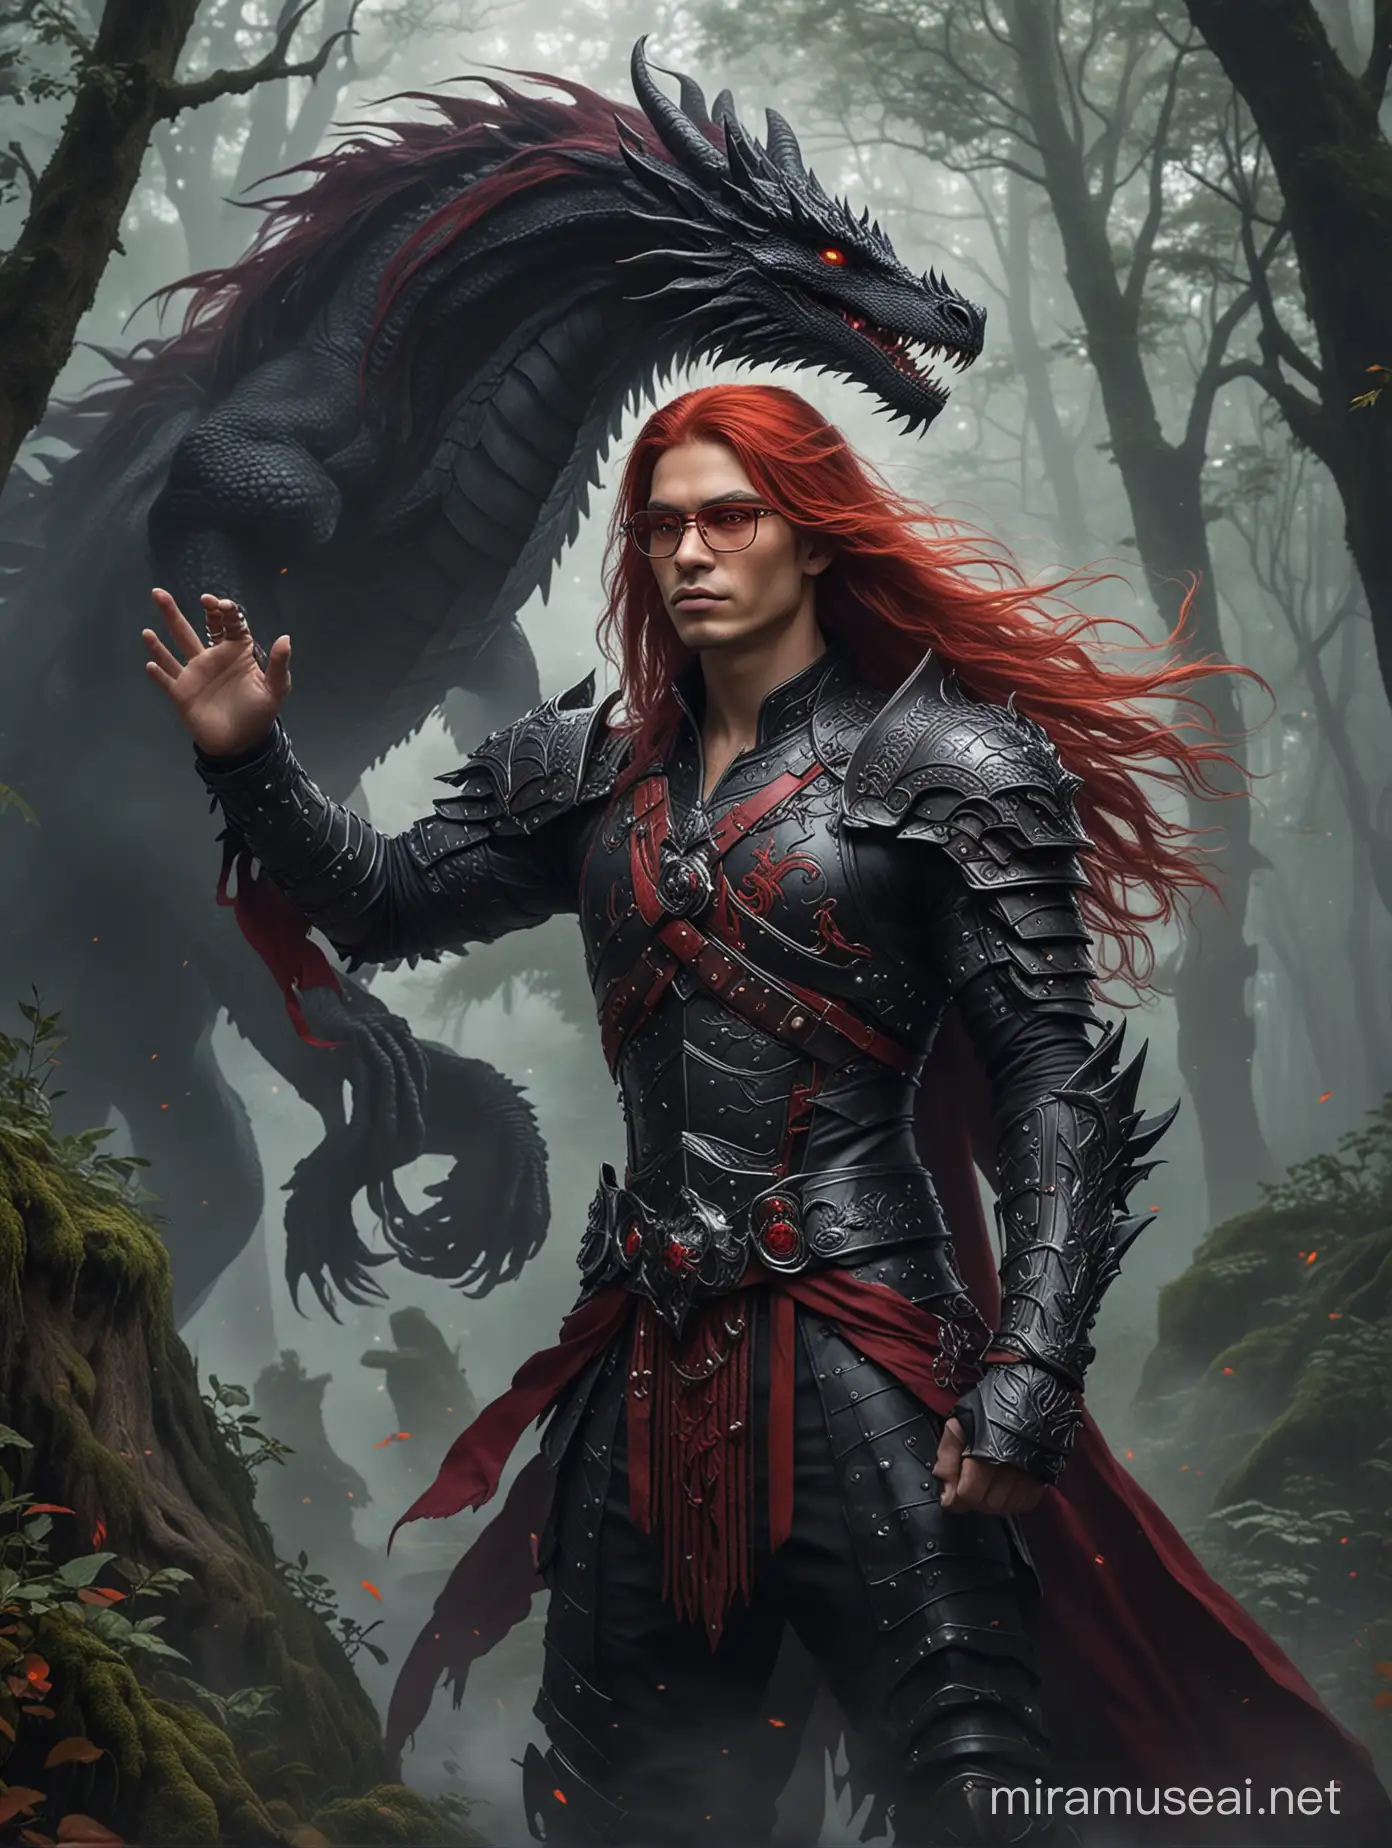 Goddess of dark magic. The picture shows a fantasy-themed image featuring a male figure long maroon hair, red glasses, with pronounced features in an elaborate black armor with dragon motifs. His left hand is raised, seemingly controlling a fiery dragon, which could symbolize power or a mystical bond with the creature. The background is a lush, misty forest that adds to the overall magical and mysterious atmosphere.
